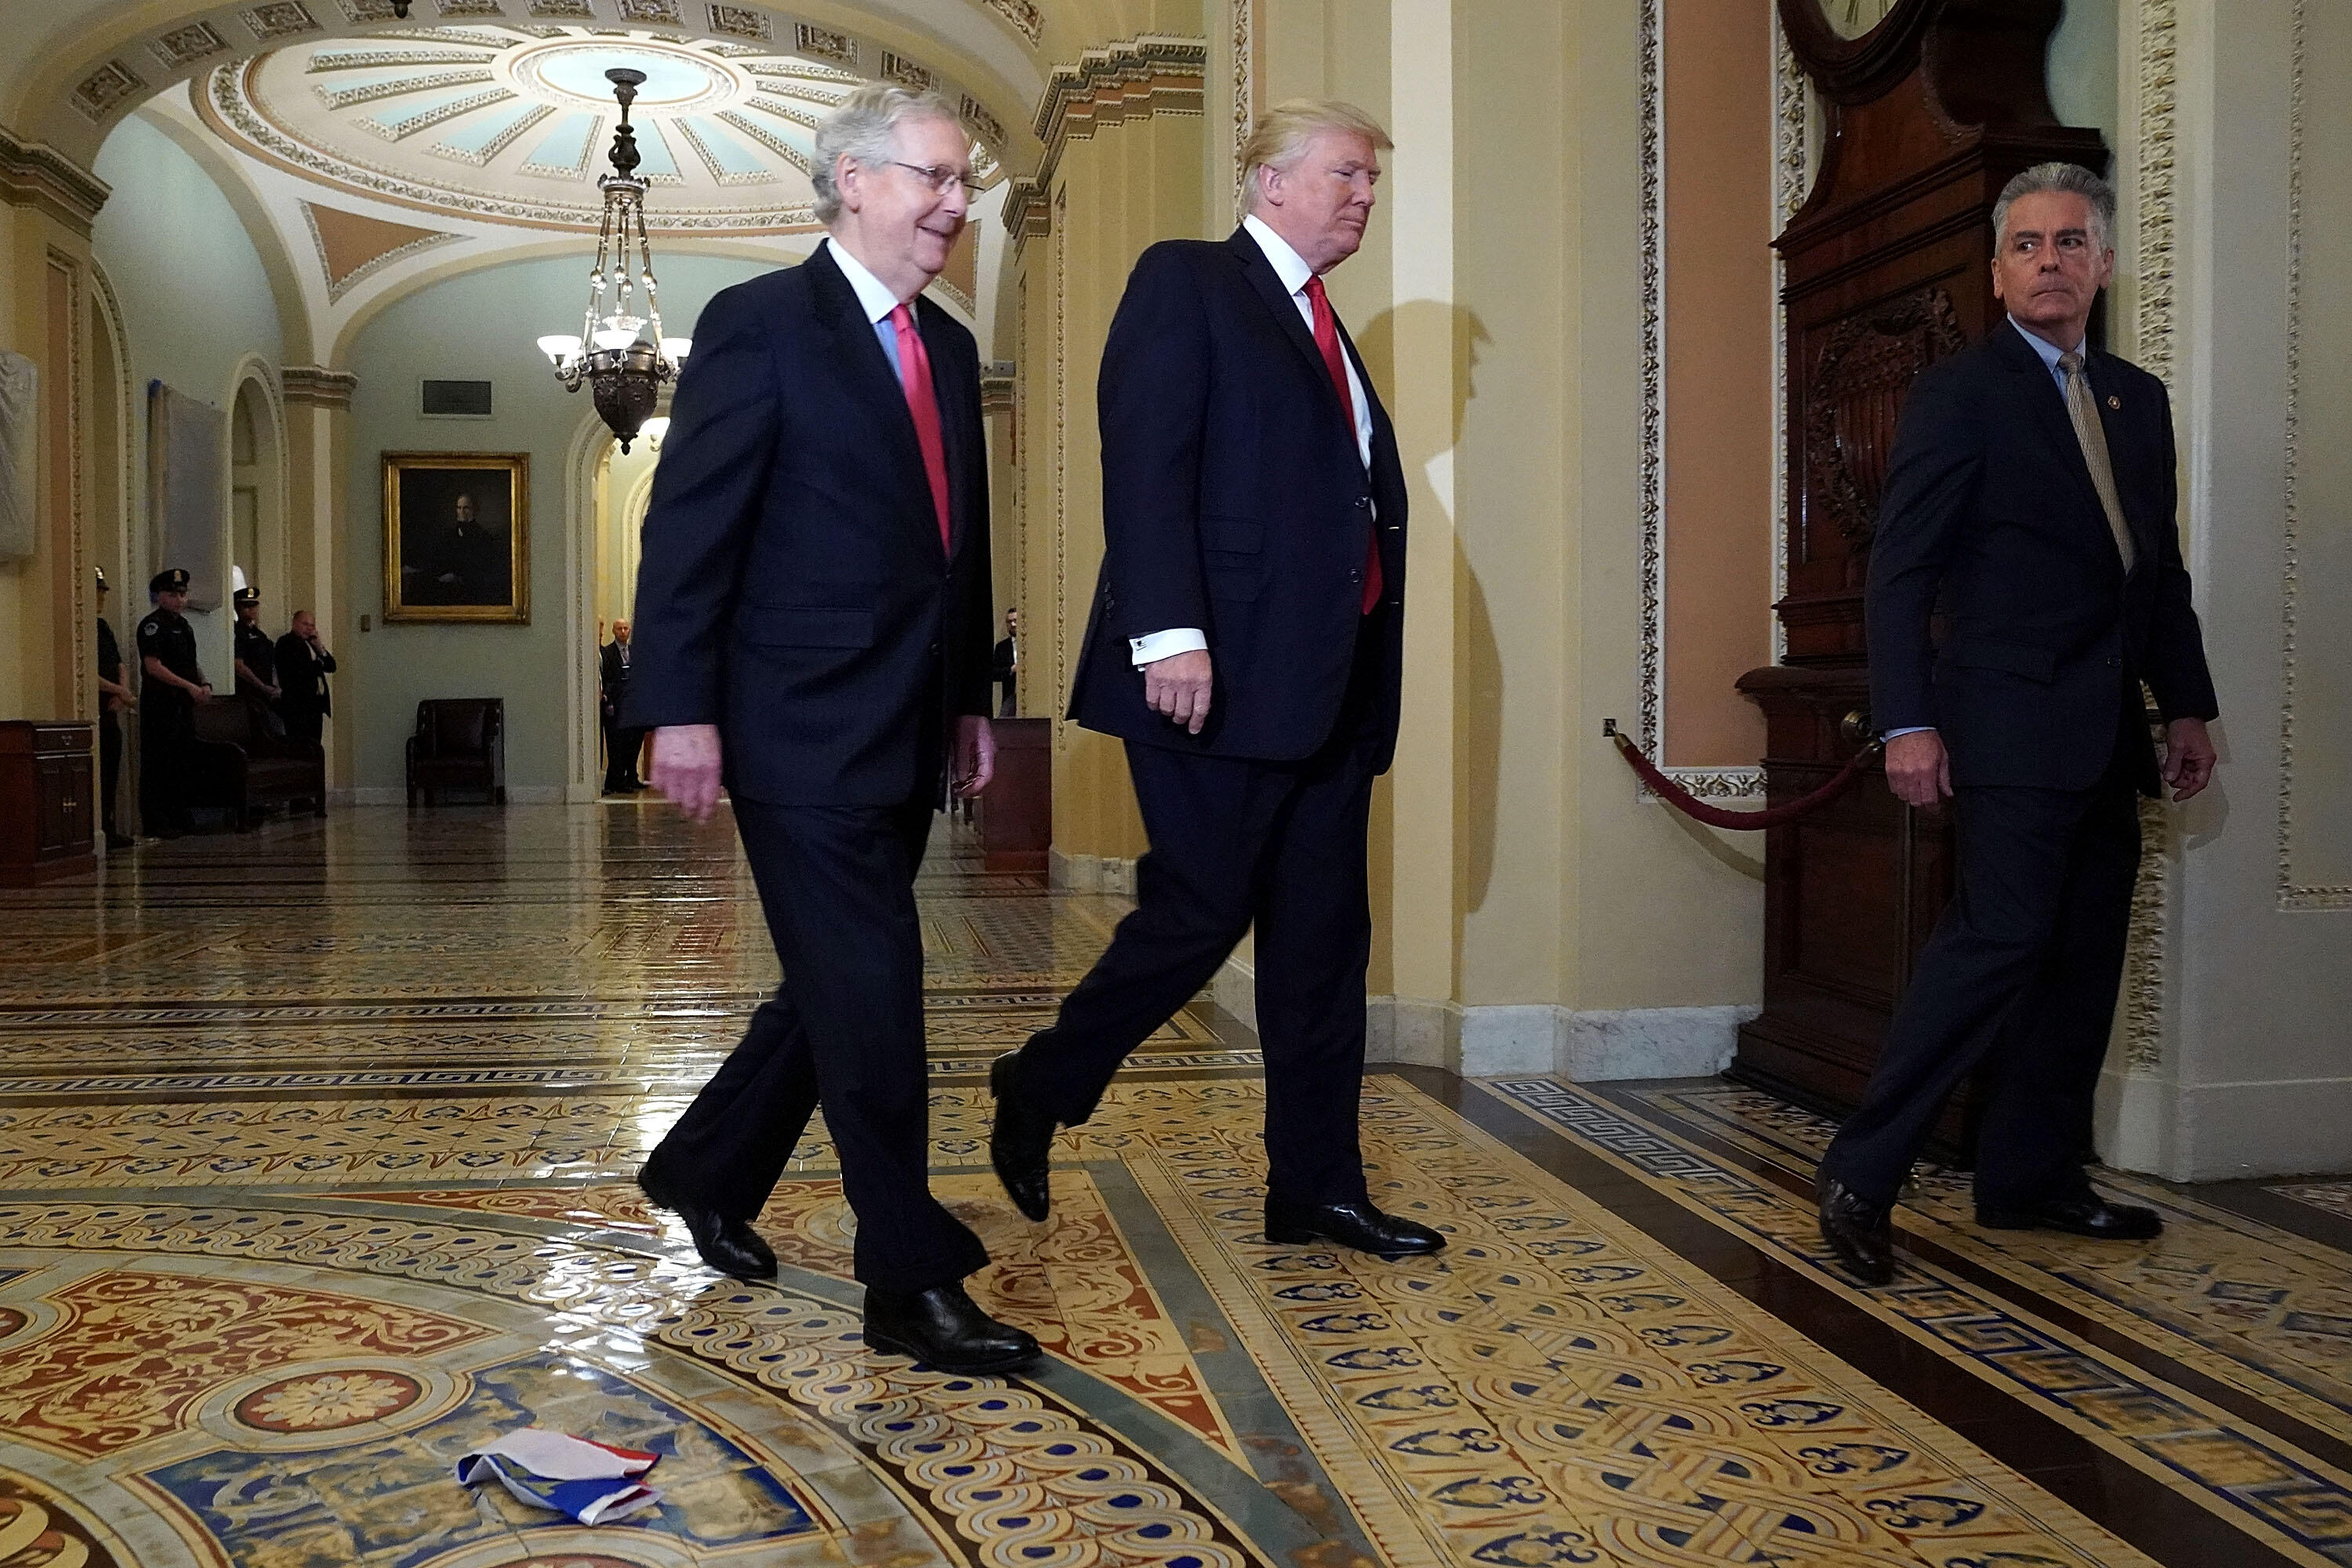 WASHINGTON, DC - OCTOBER 24: Senate Majority Leader Mitch McConnell (R-KY) (L) and U.S. President Donald Trump arrive for the Republican Senate Policy Luncheon and walk past a Russian flag on the floor that was thrown at the U.S. Capitol October 24, 2017 in Washington, DC. Trump joined the senators to talk about upcoming legislation, including the proposed GOP tax cuts and reform. (Photo by Chip Somodevilla/Getty Images)